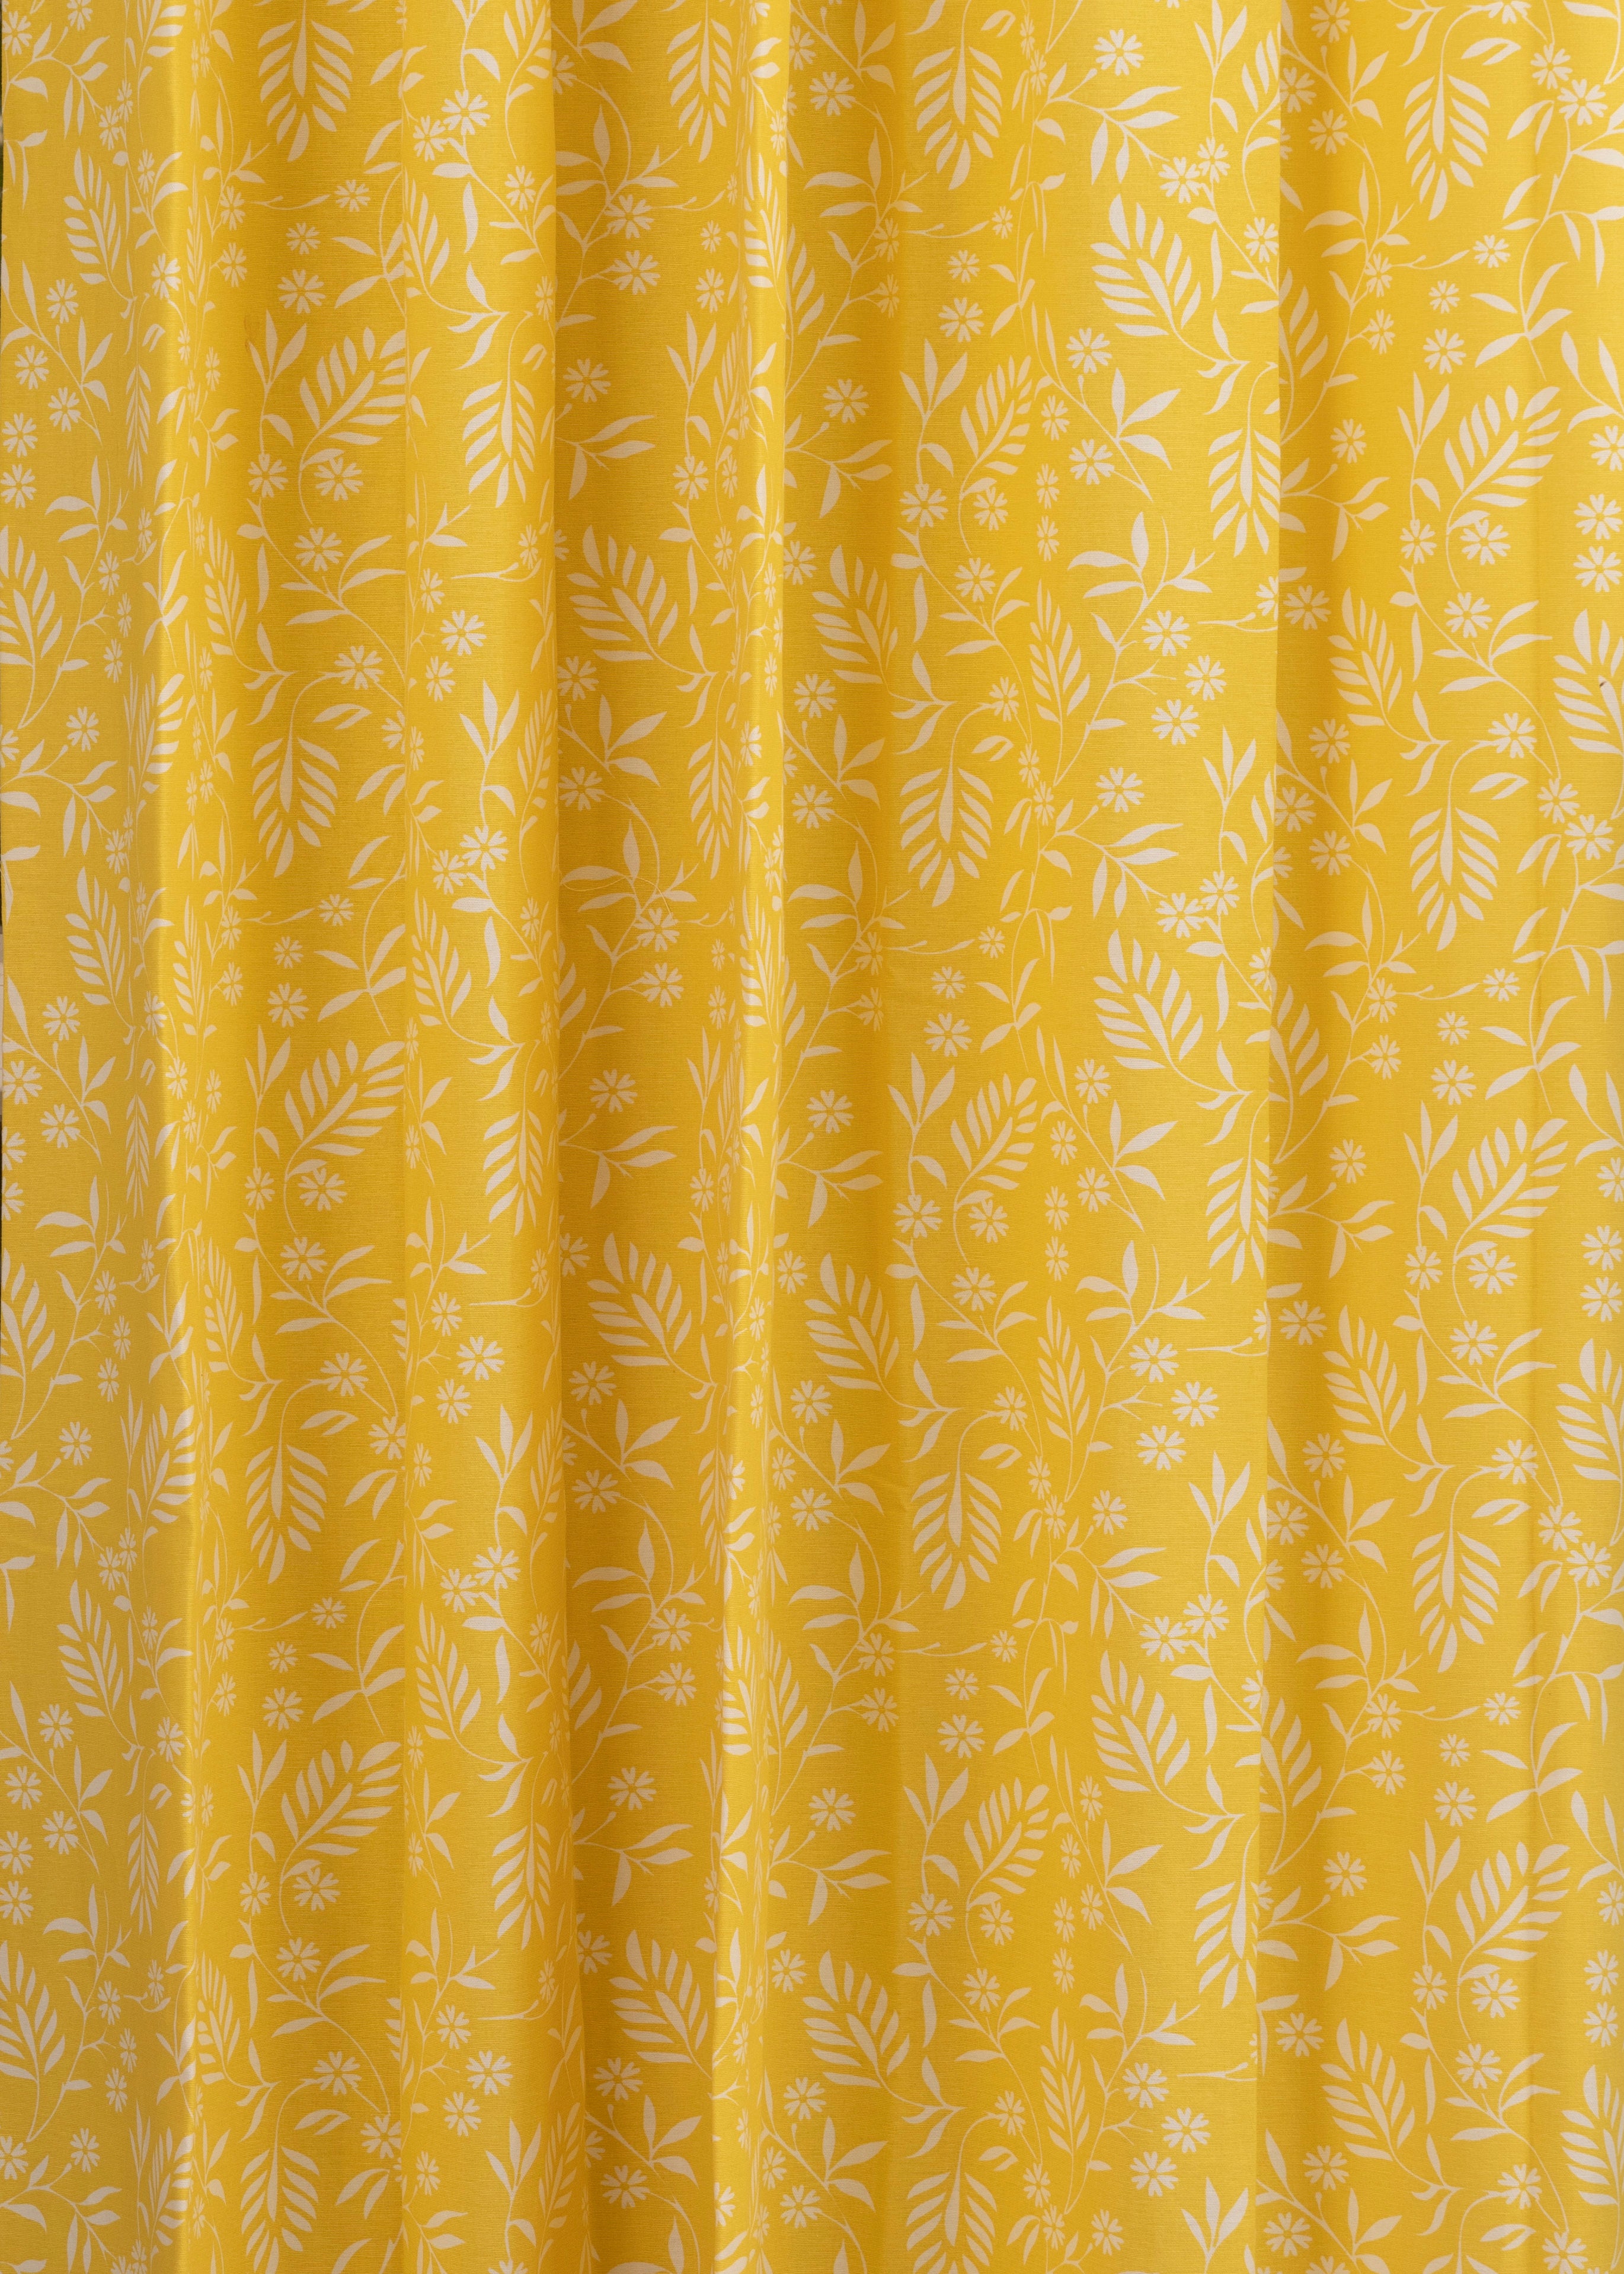 Yellow Daisy 100% Customizable Cotton floral curtain for kids room, living room & bed room - Room darkening - Yellow